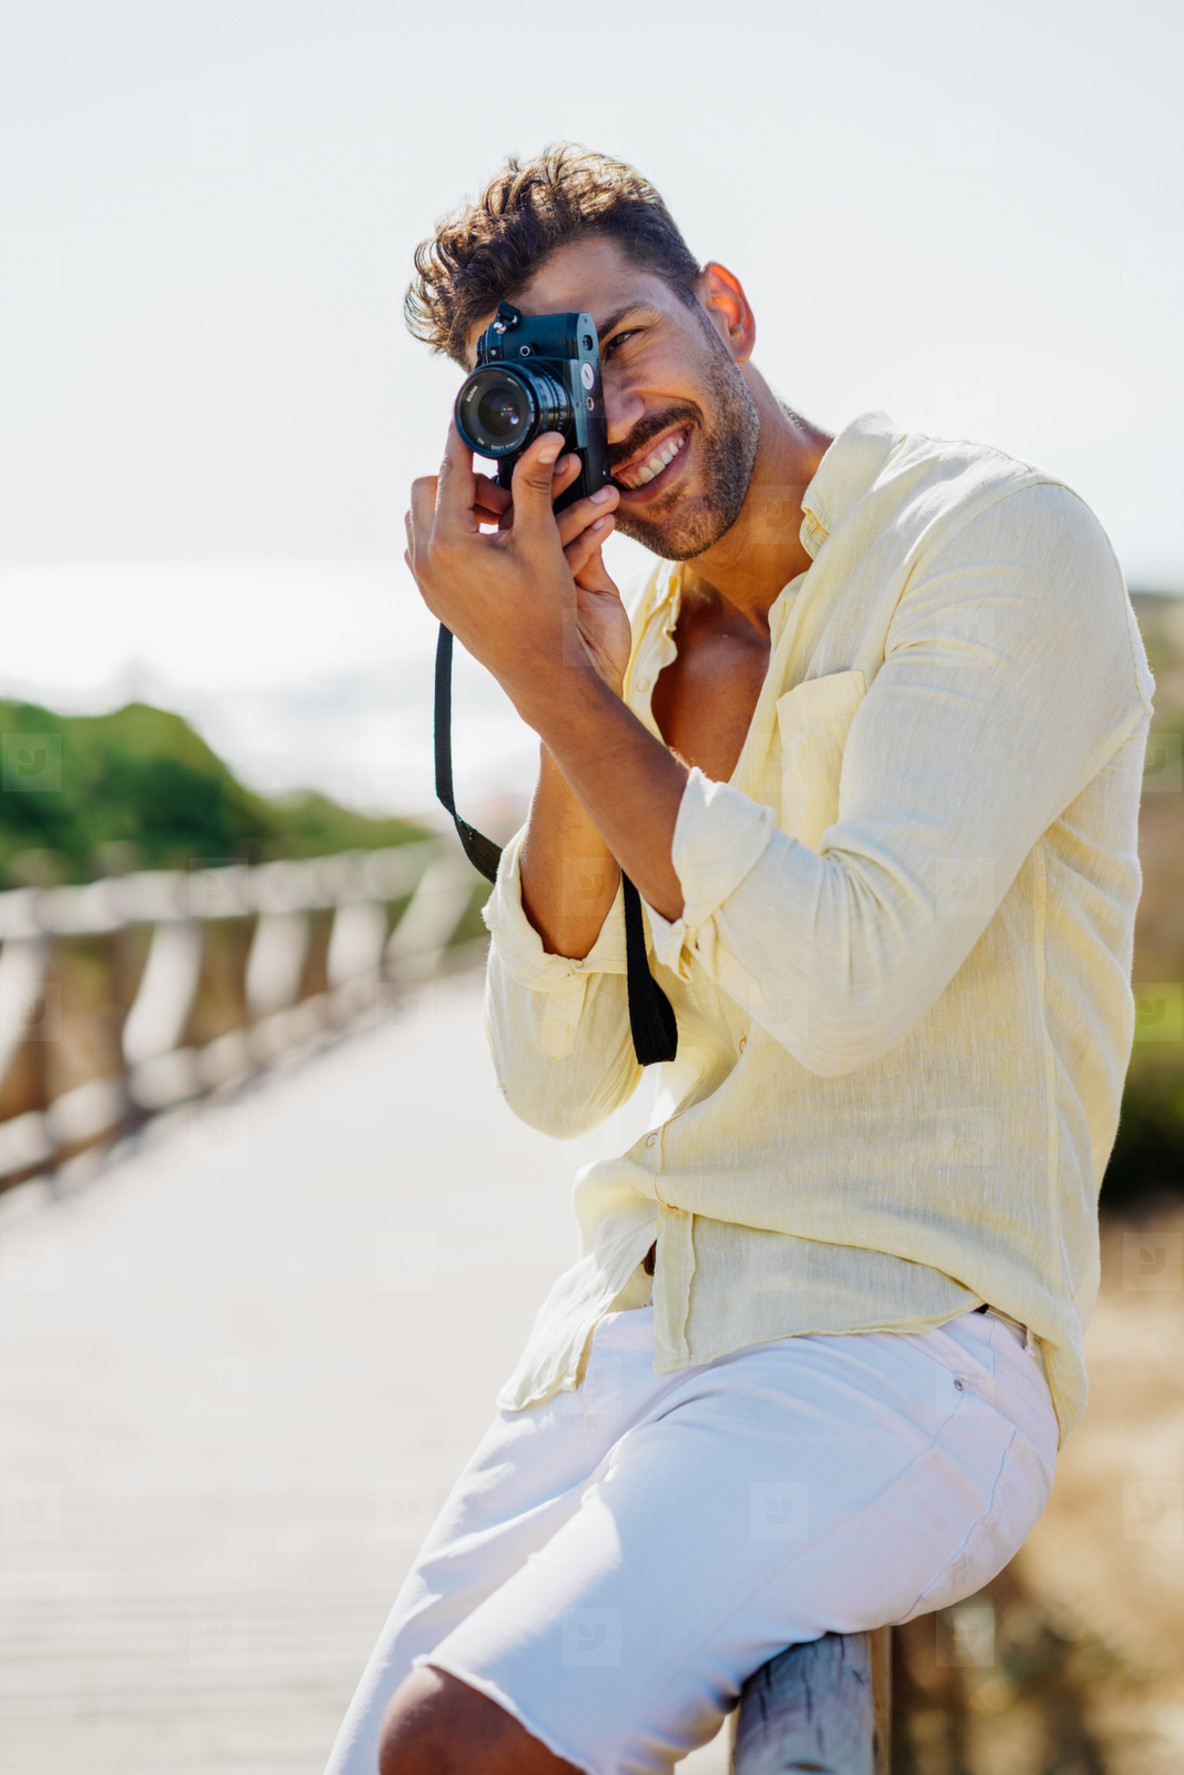 Handsome man photographing in a coastal area